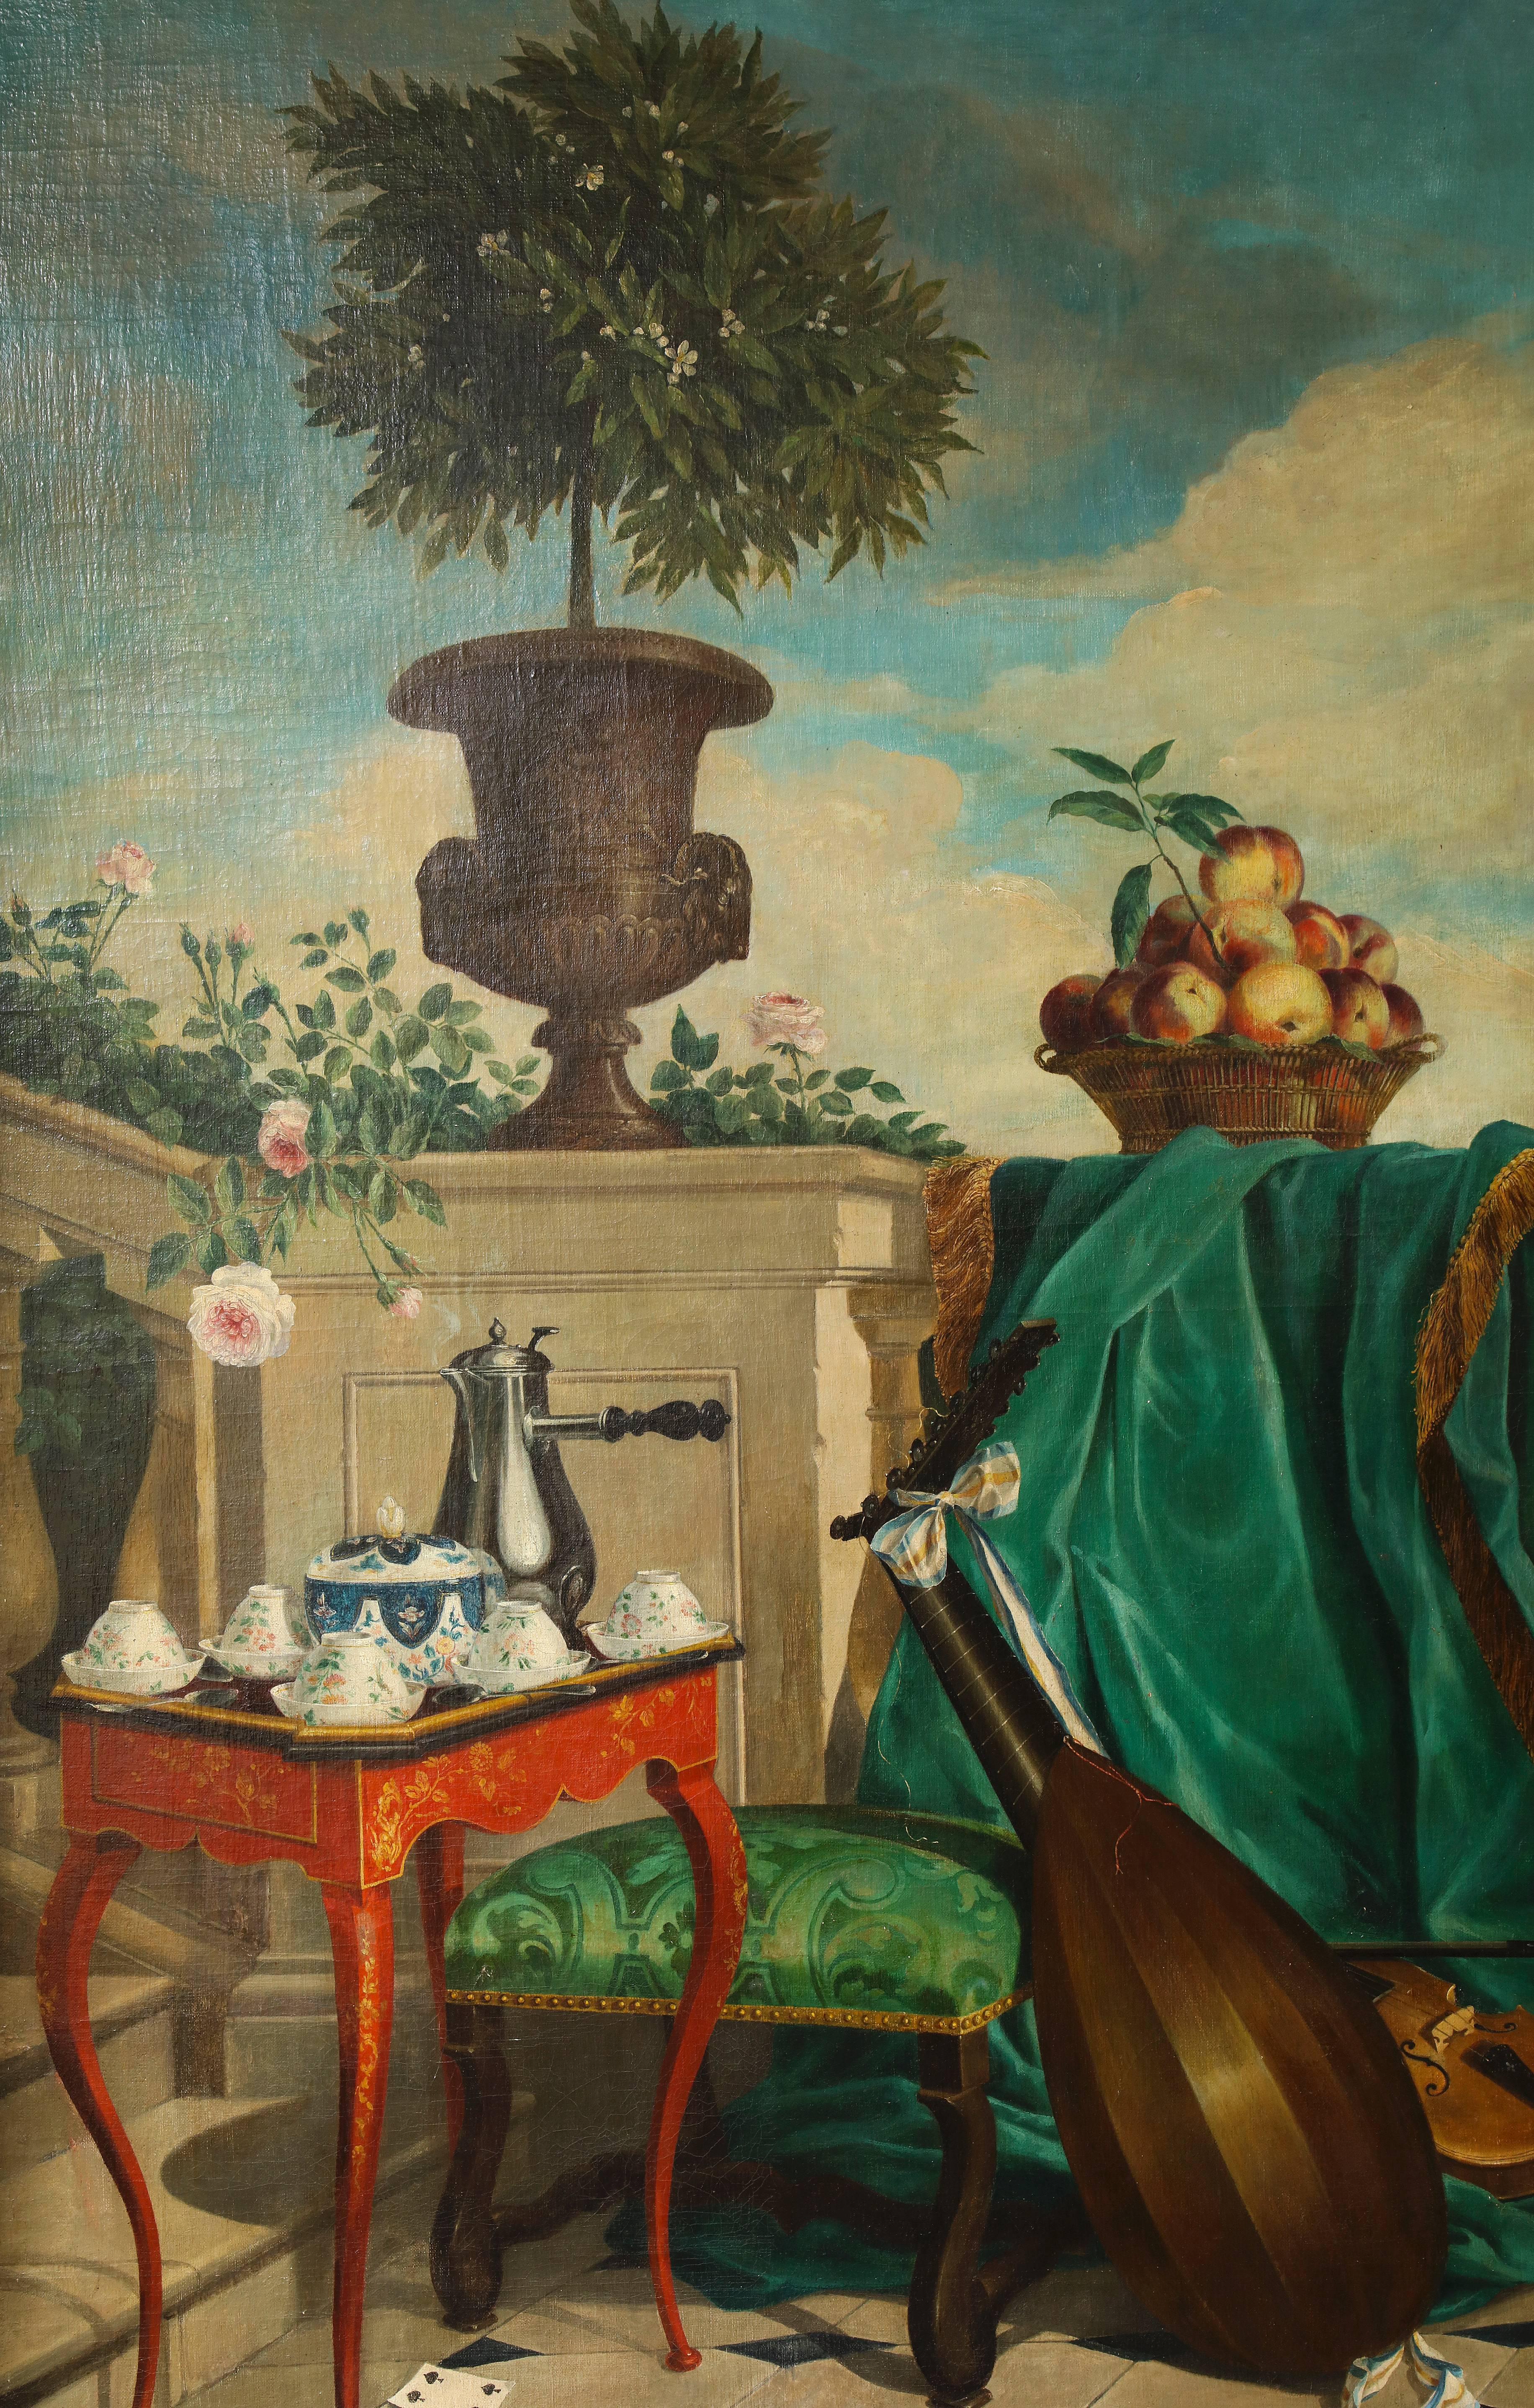 Oil on canvas, Still Life Painting of a Garden Terrace, the foreground with a porcelain service on a red japanned chinoiserie small table, with musical instruments, against a velvet curtain draped across a balustrade to the rear, atop which is a